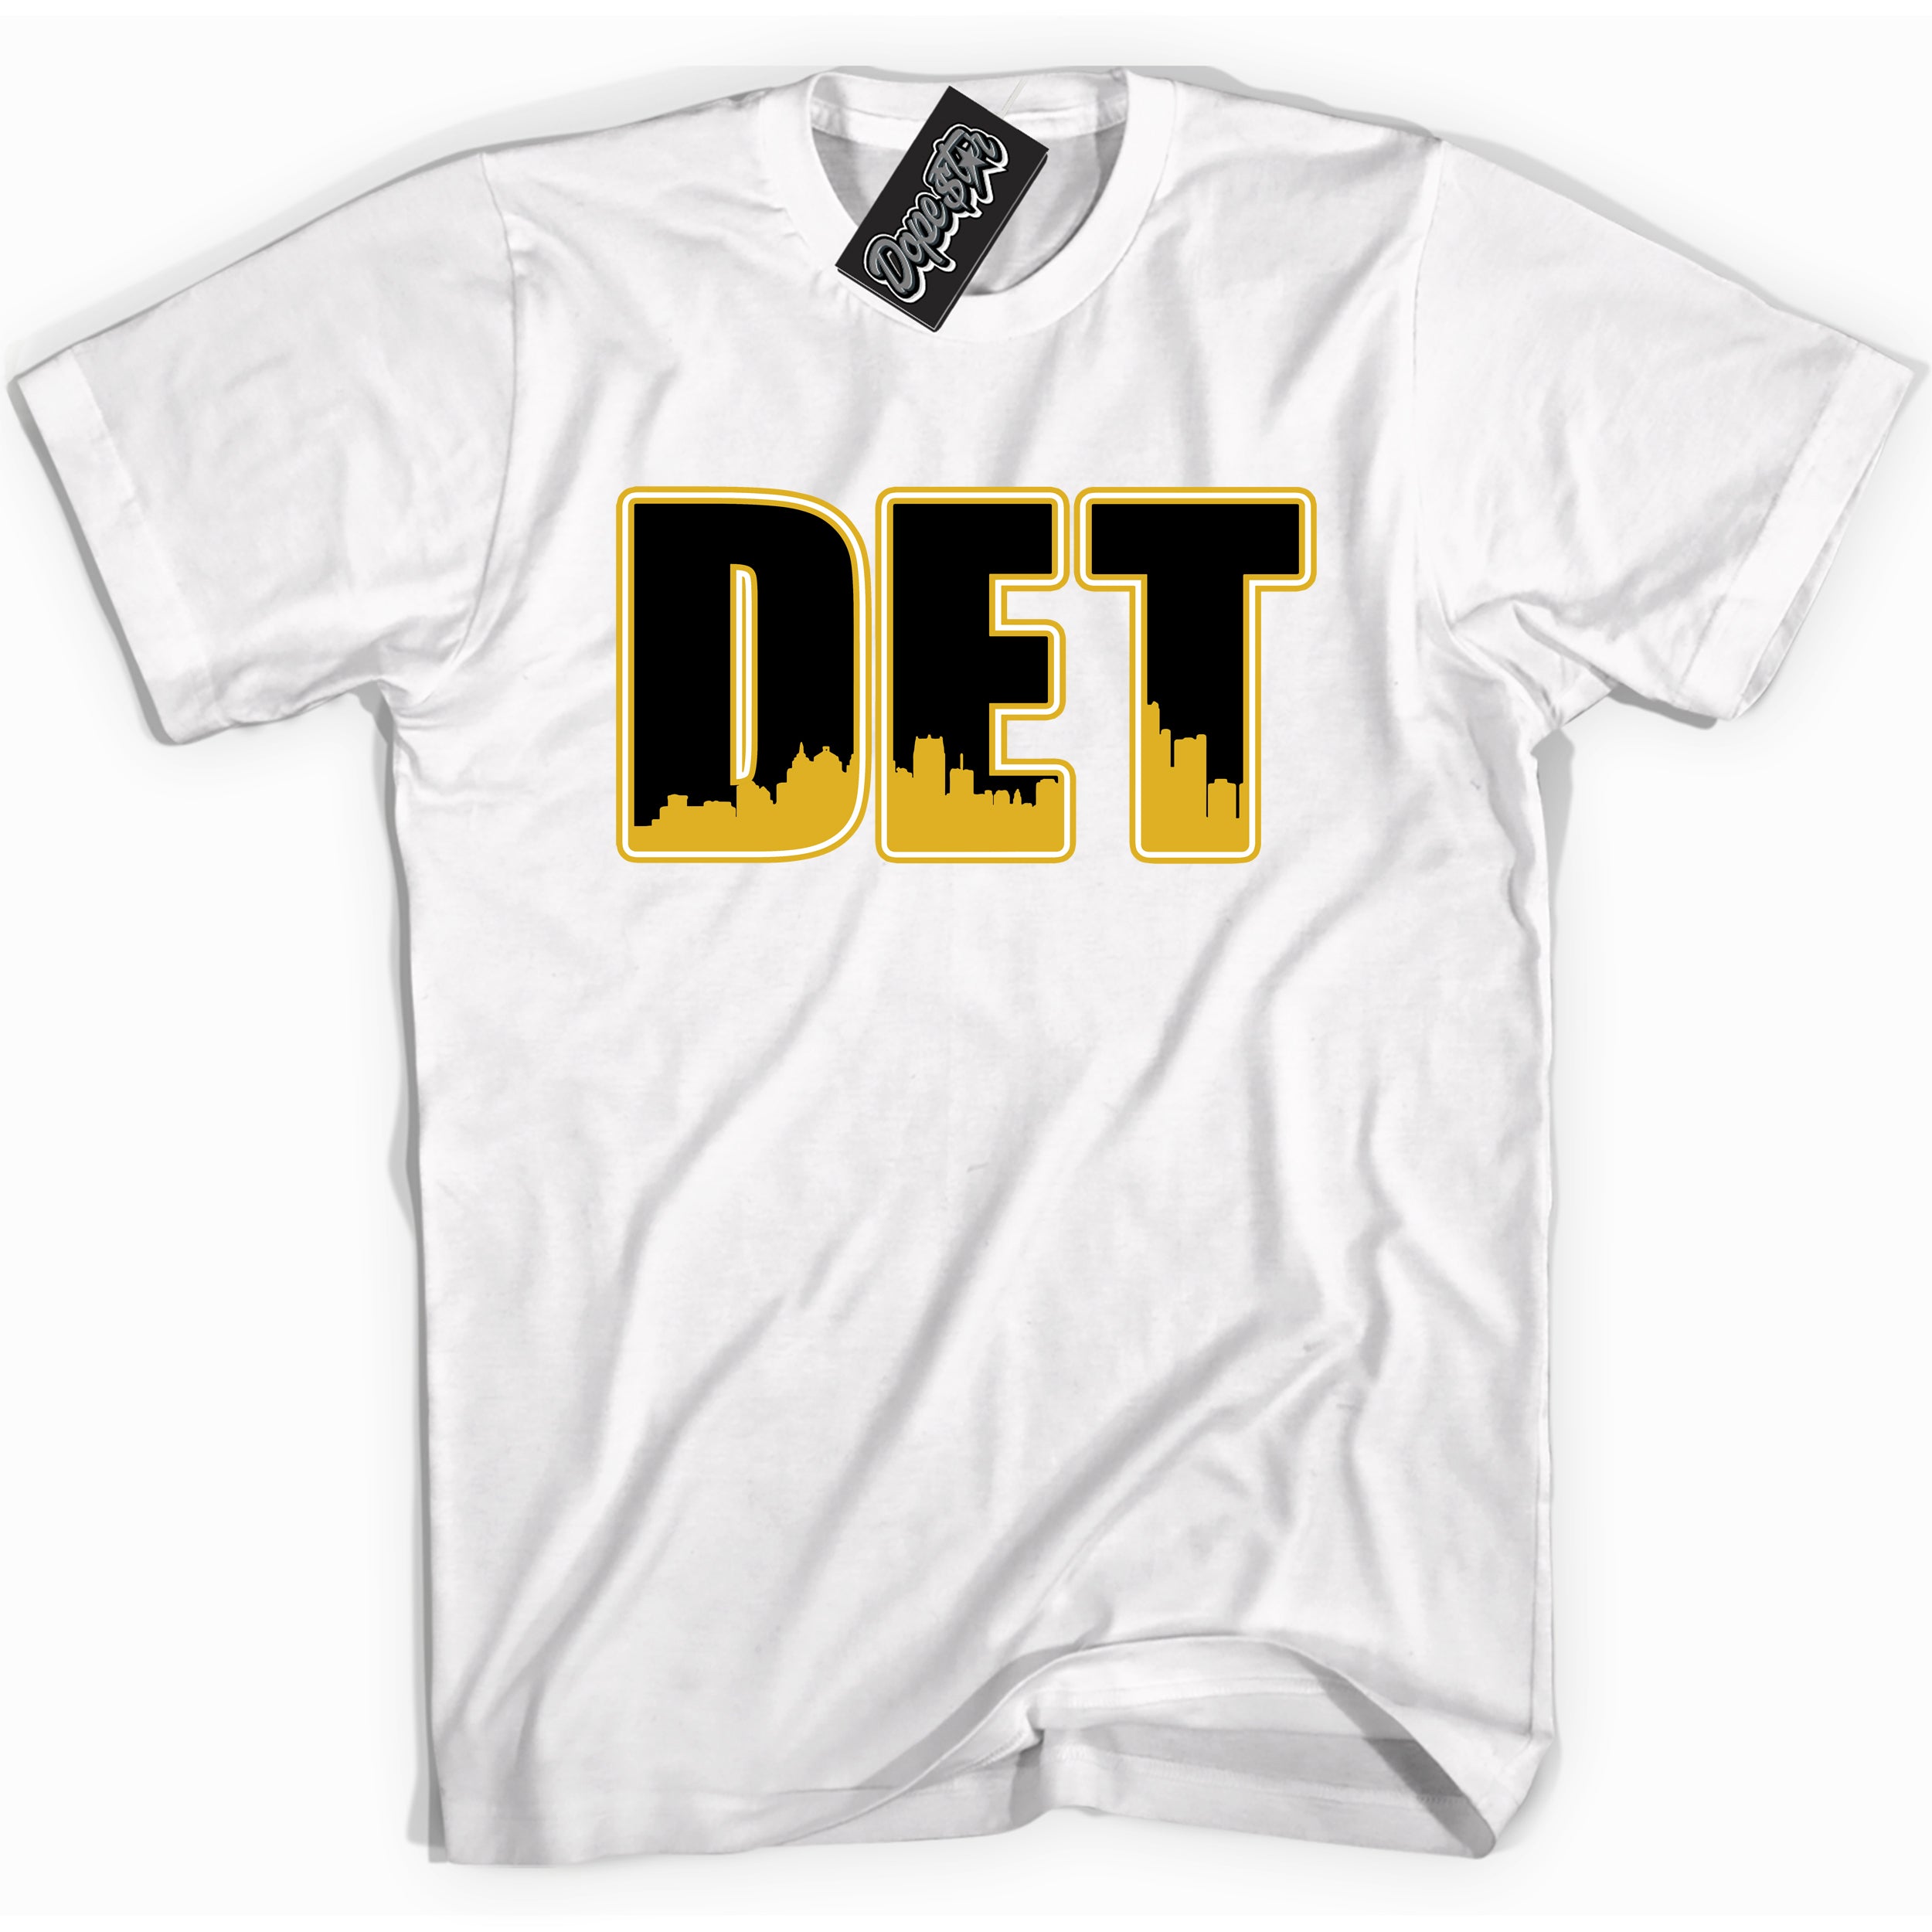 Cool White Shirt with “ Detroit” design that perfectly matches Yellow Ochre 6s Sneakers.